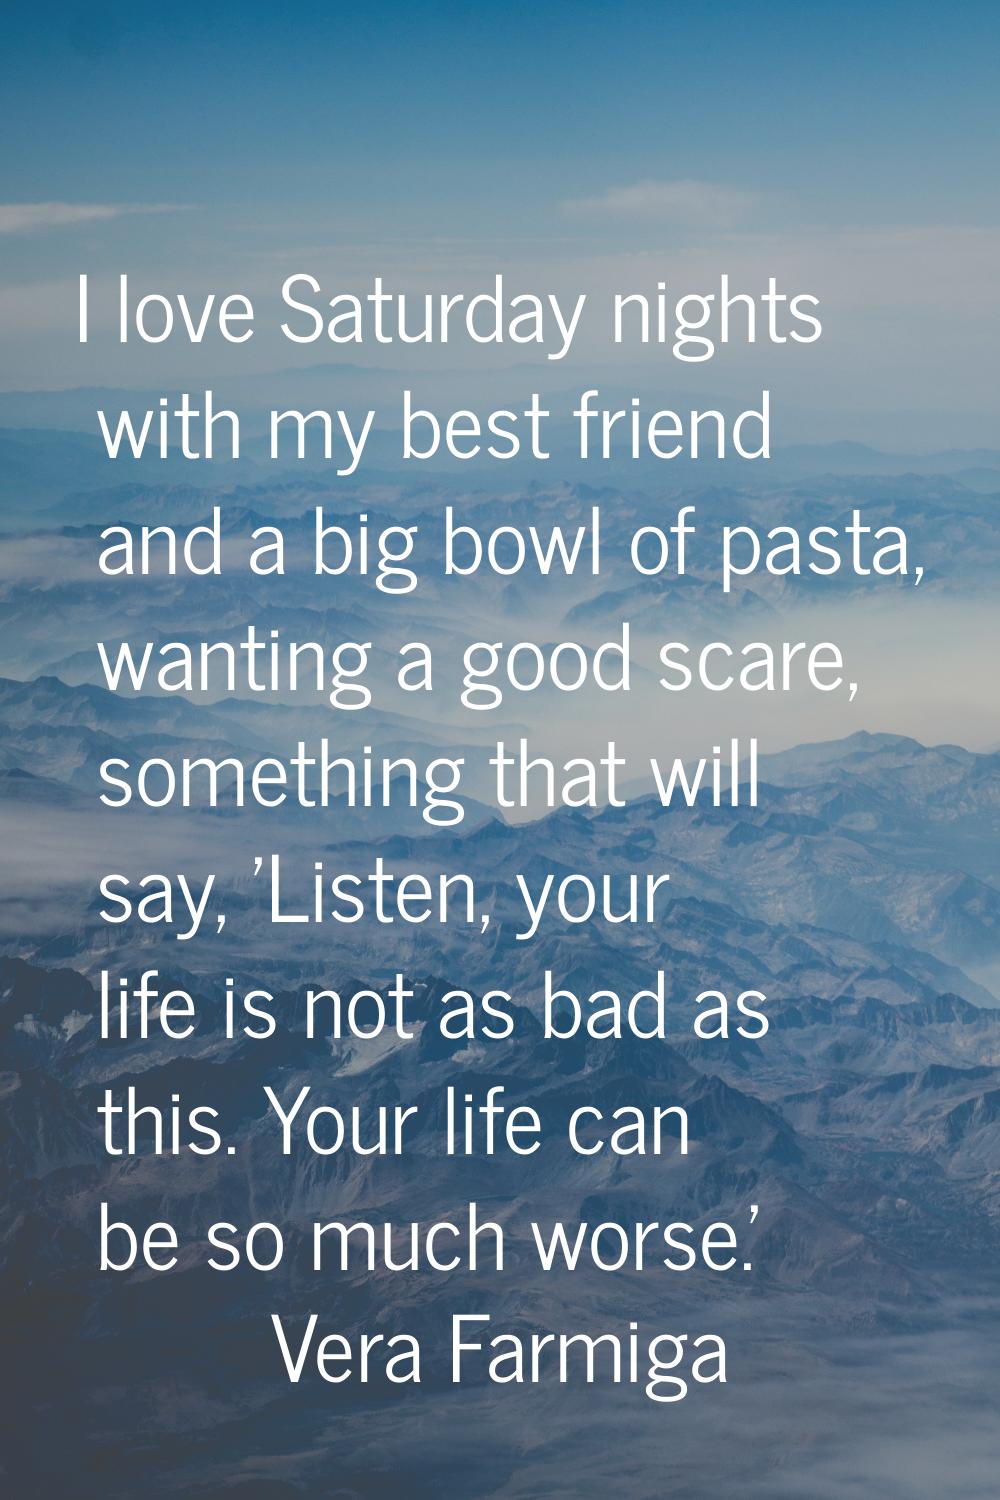 I love Saturday nights with my best friend and a big bowl of pasta, wanting a good scare, something